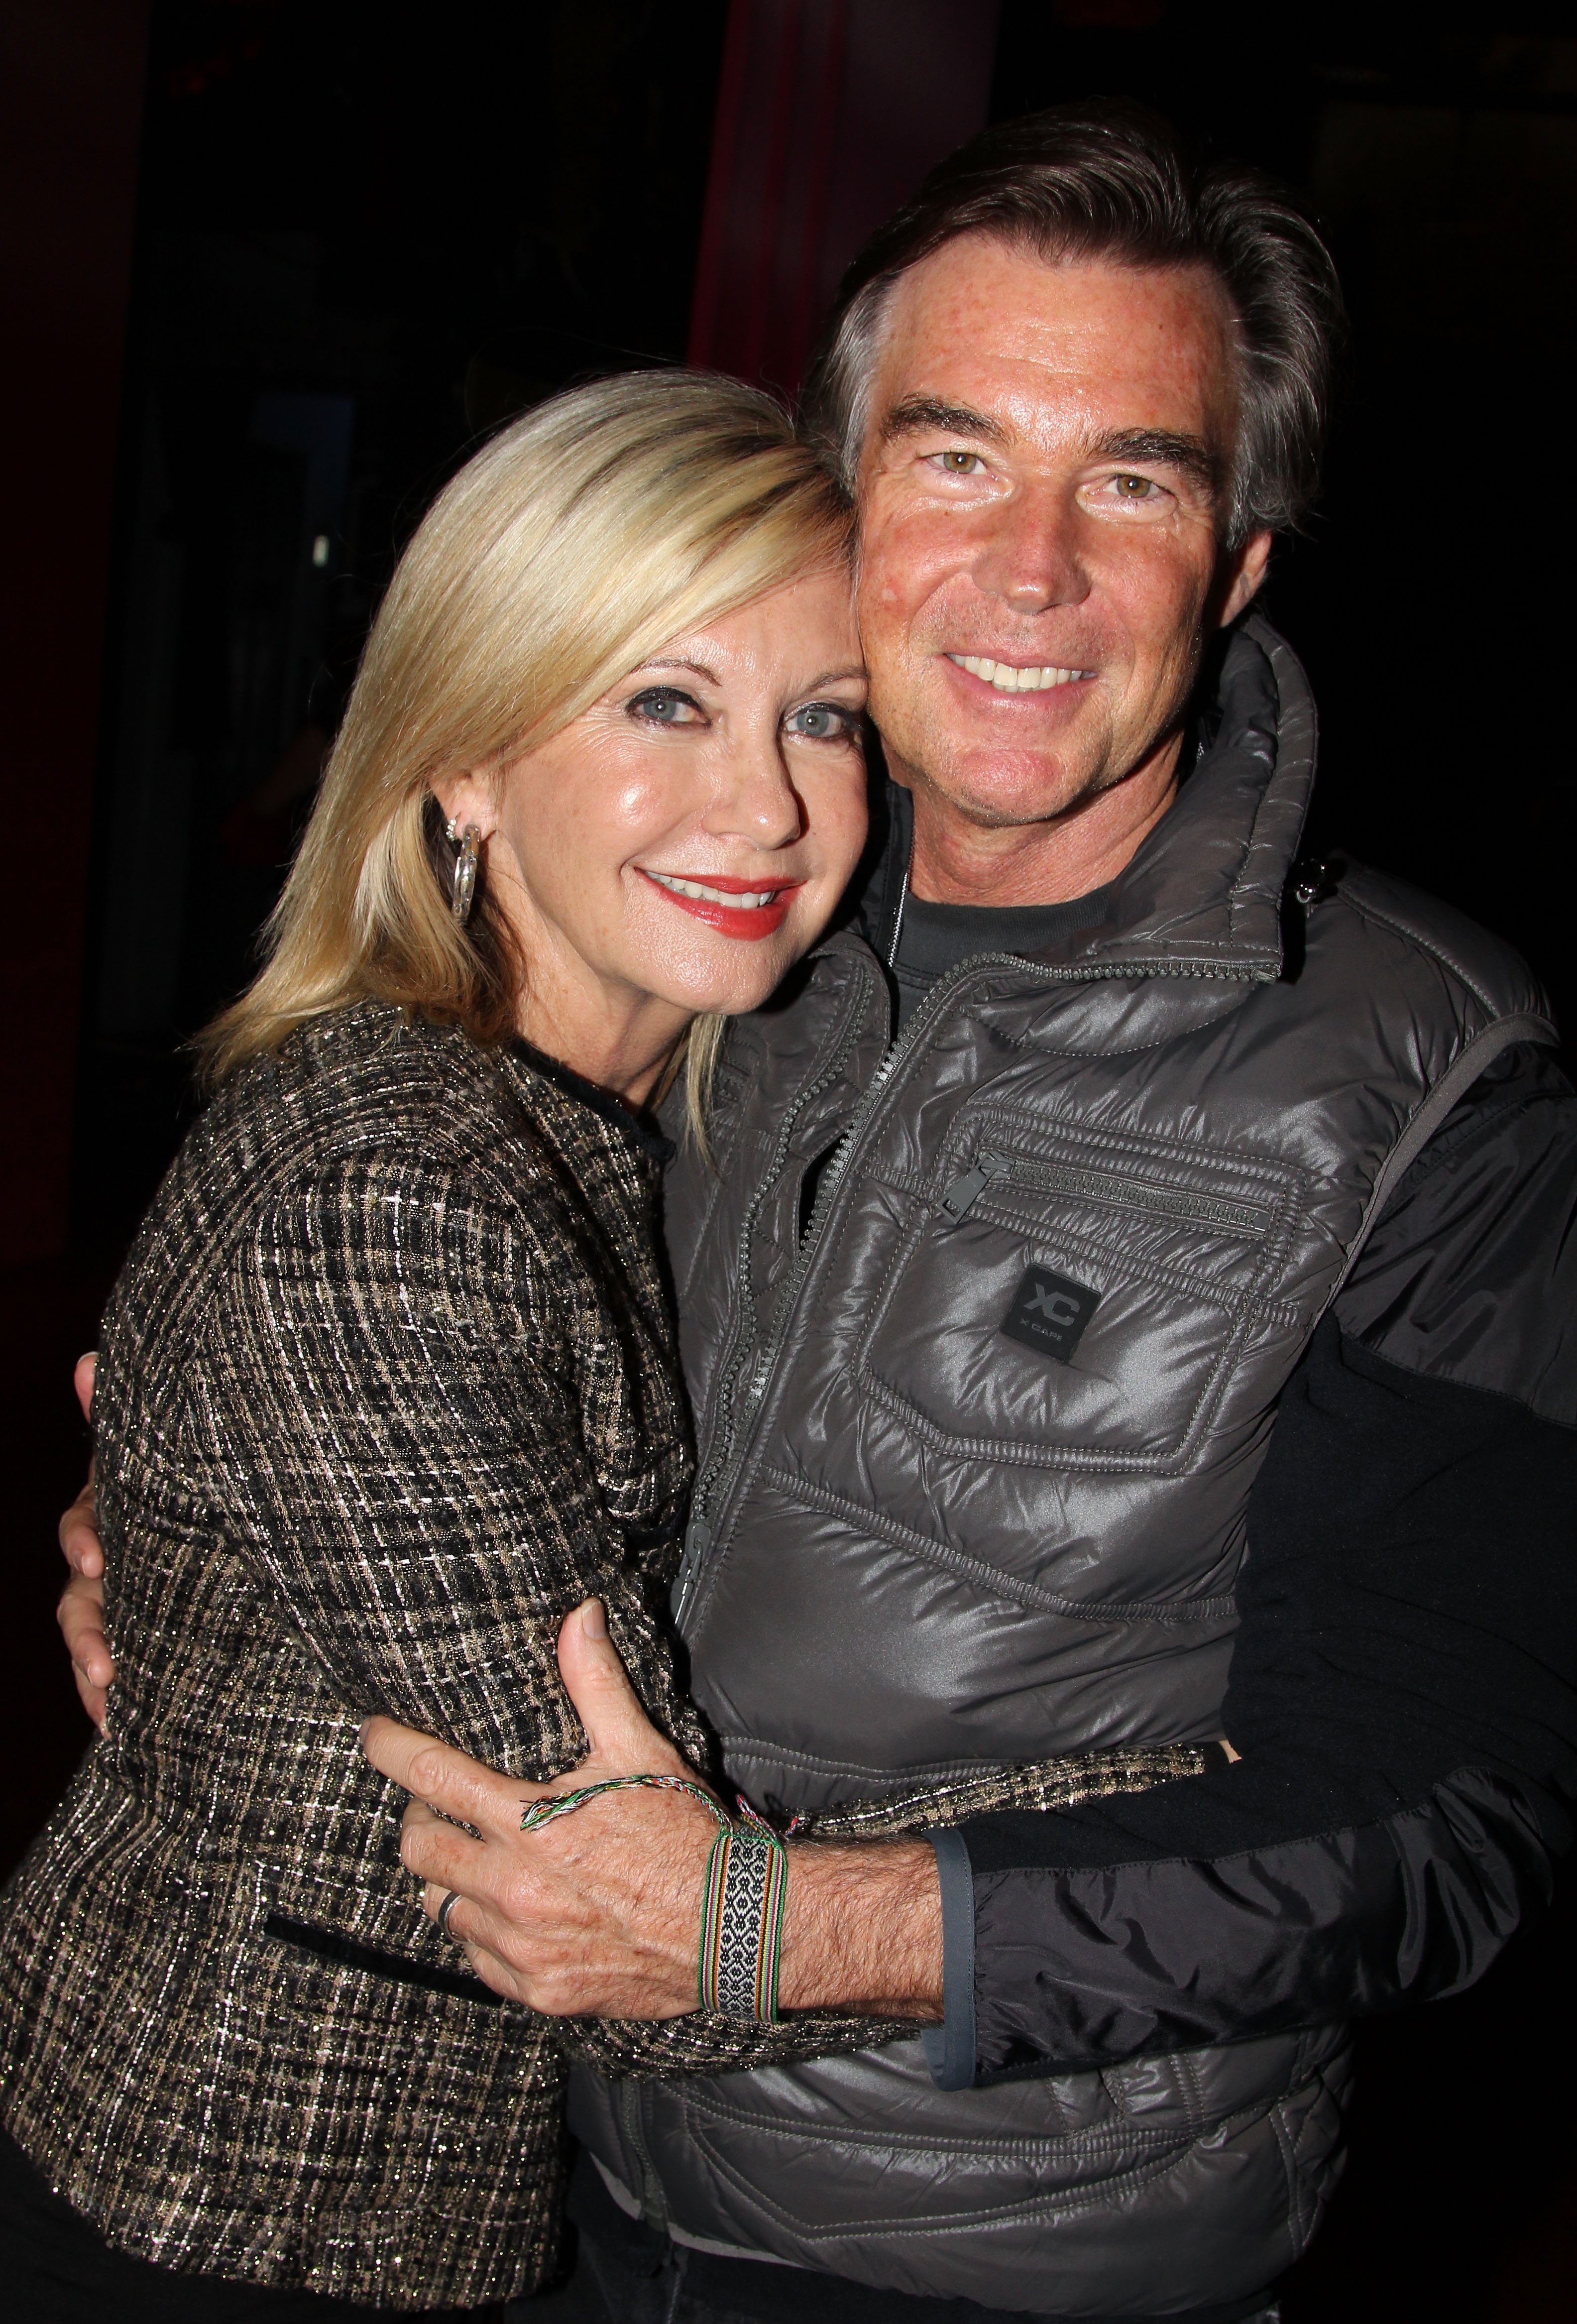 Olivia Newton-John and John Easterling attend the hit musical "Priscilla Queen of The Desert" on Broadway at the Palace Theater on December 6, 2011 in New York City. | Source: Getty Images